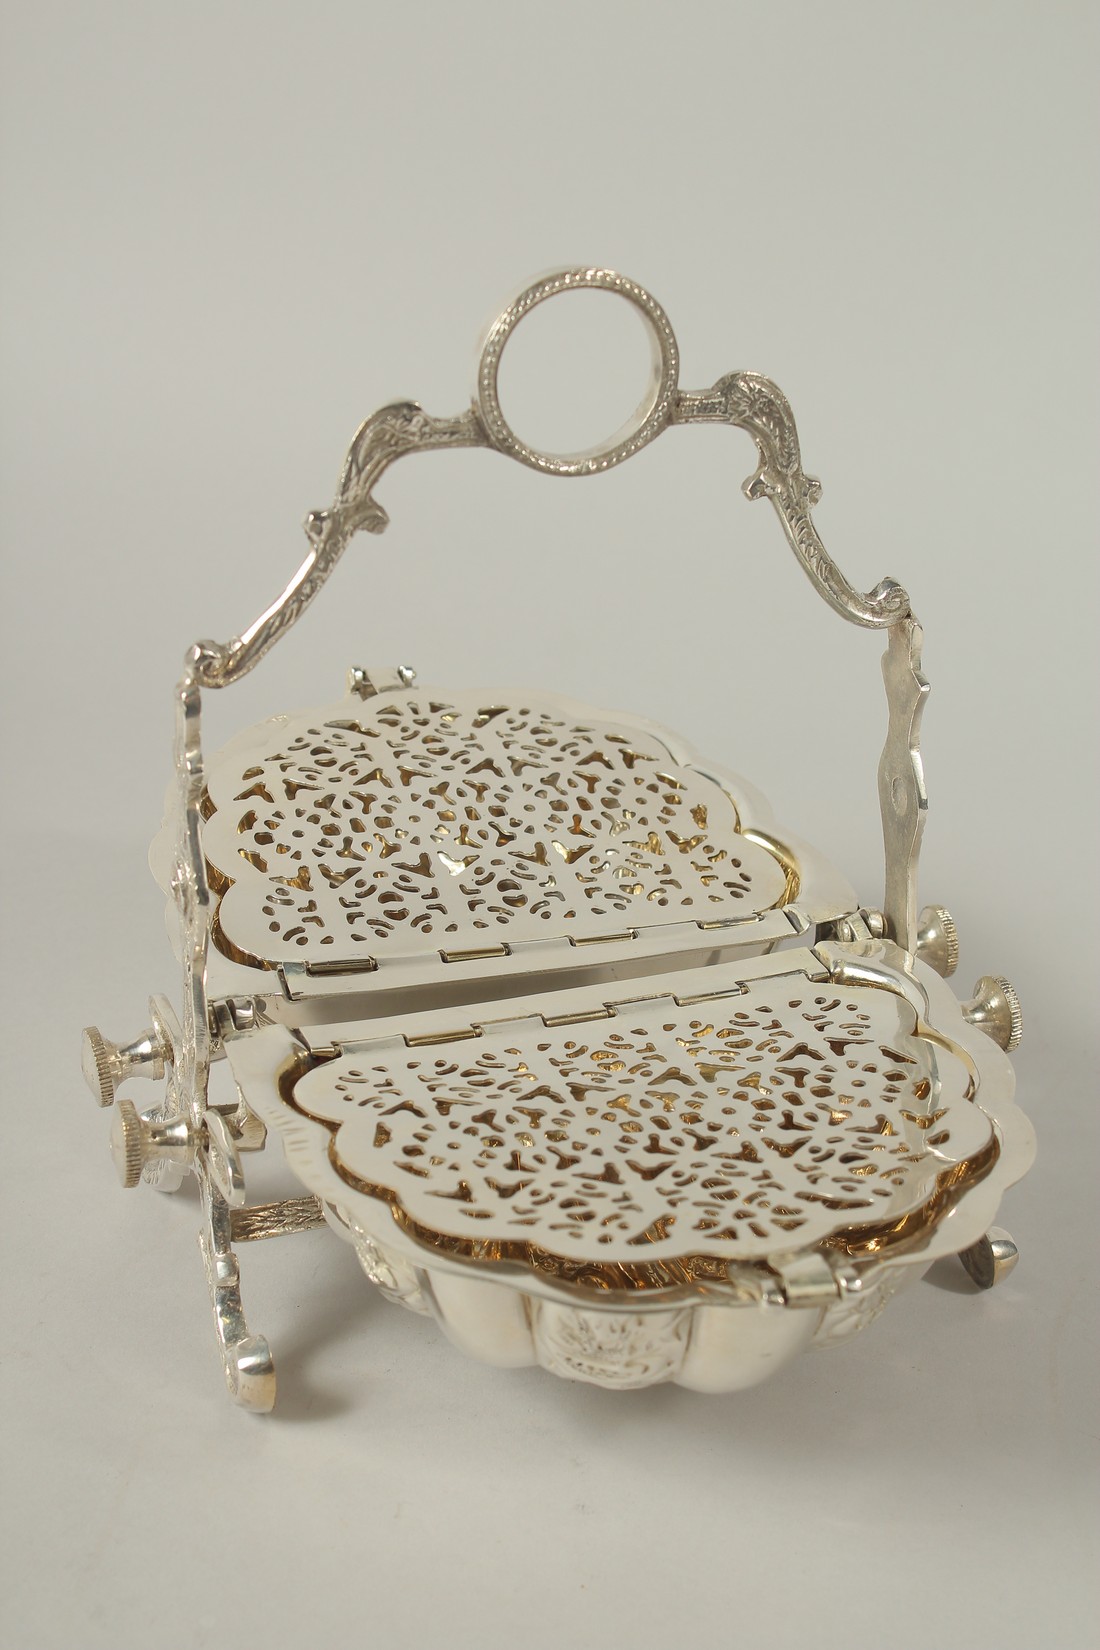 A SILVER PLATED CHEESE AND BISCUIT STAND. - Image 2 of 2